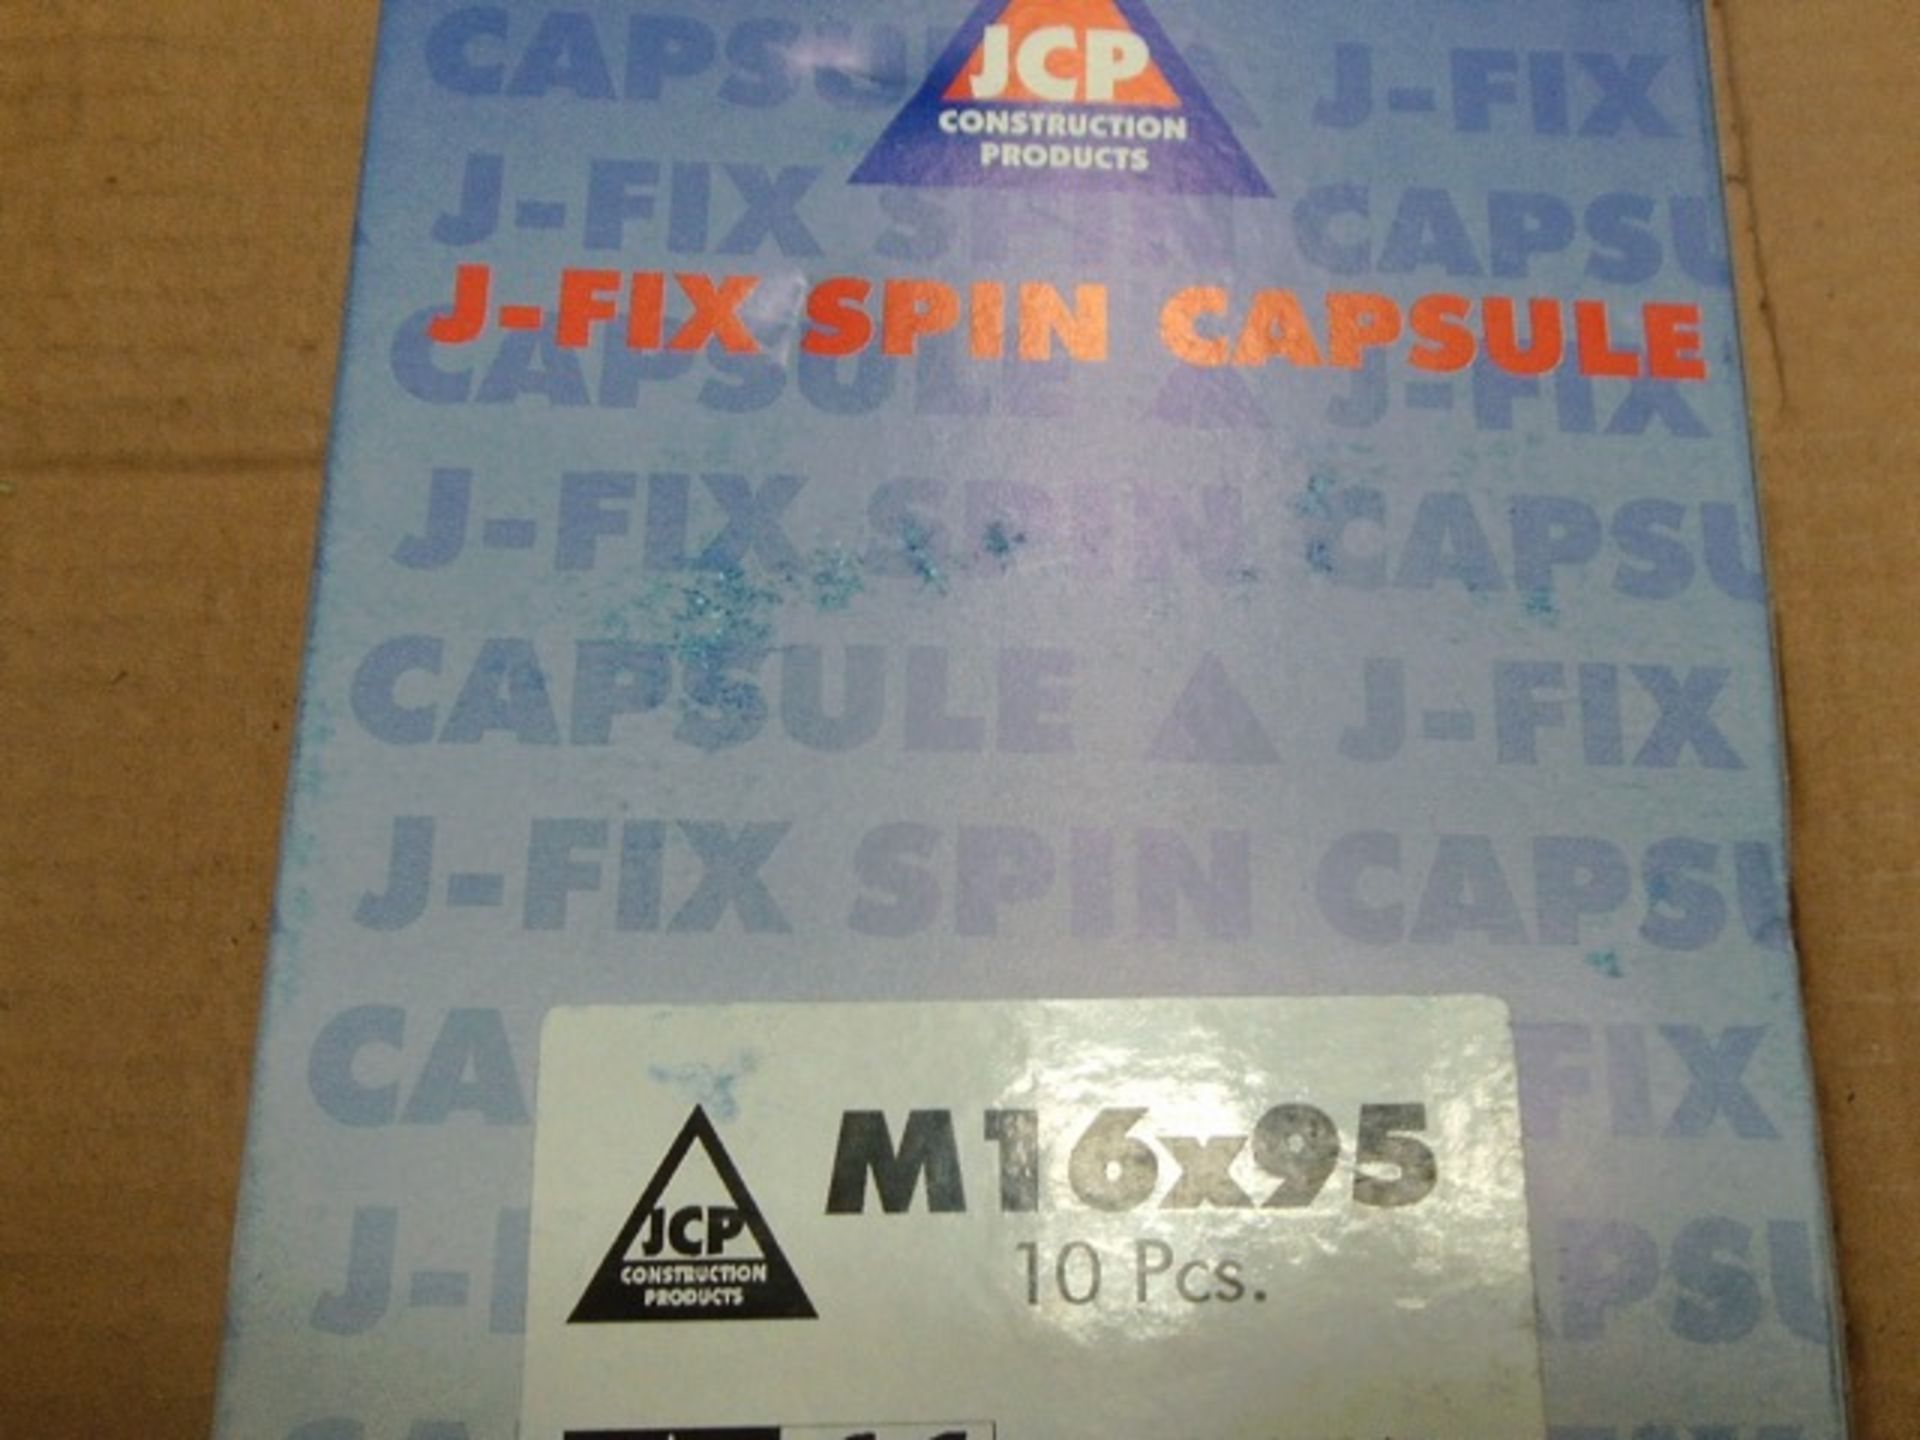 2 boxes - 20 pcs brand new in packaging as pictured - no outer box -M16 x 95  Chemical Anchor Spin - Image 2 of 2